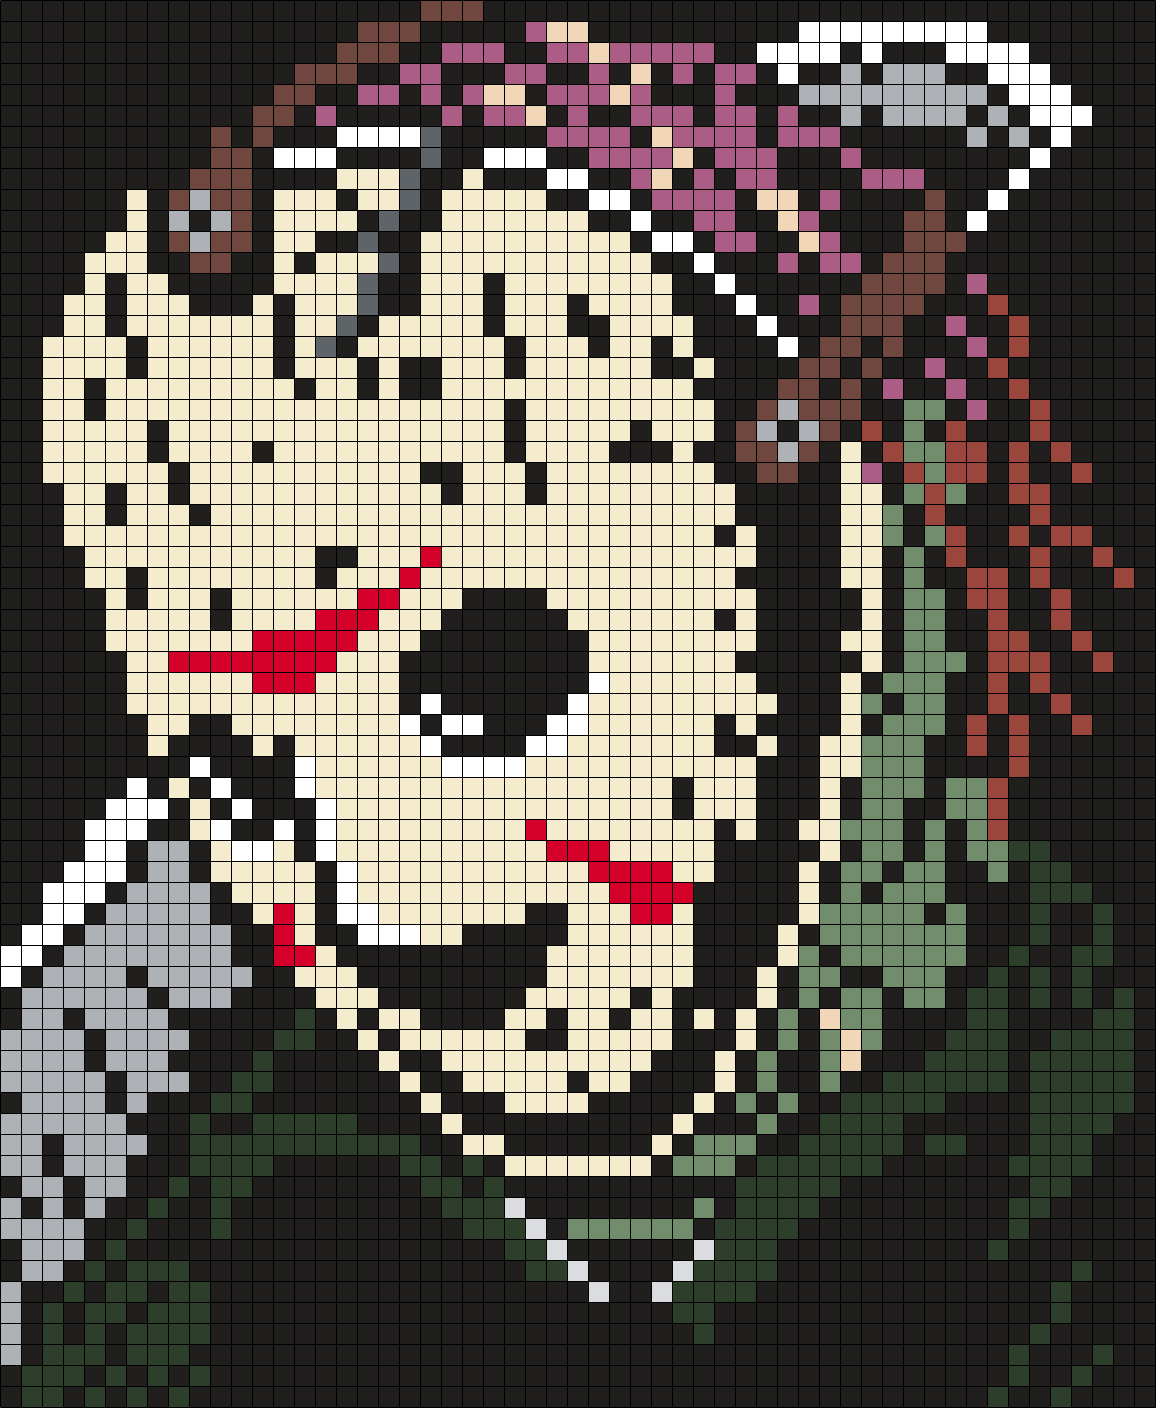 Jason Voorhees / Friday The 13th Poster (Square)